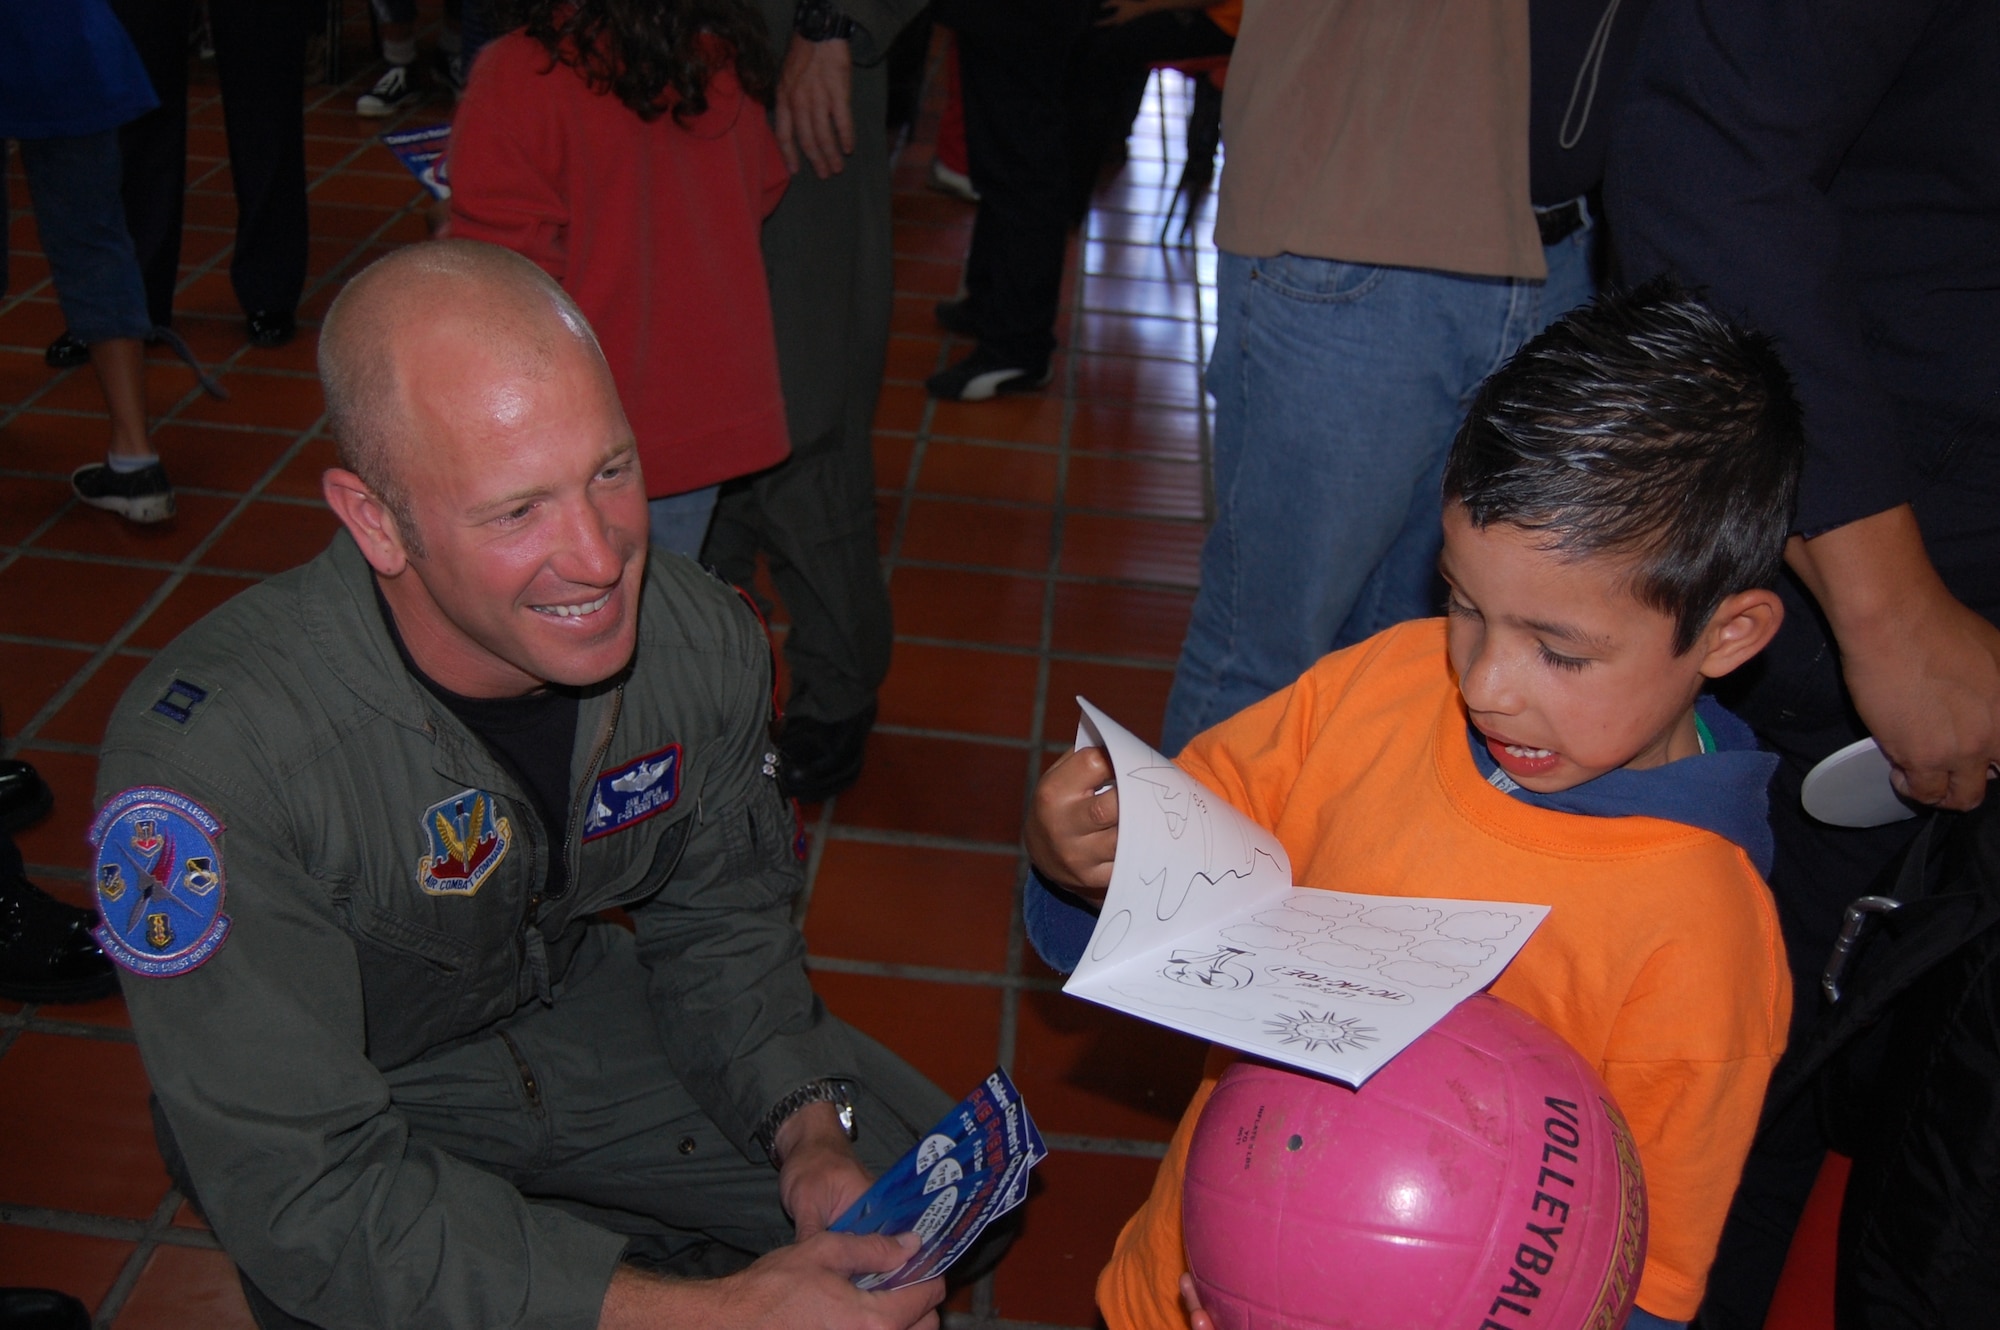 Capt. Sam Joplin, the F-15 West Coast Demonstration Team pilot, observes a child’s reaction upon receiving a coloring book from visiting Airmen.  Airmen visited and ate lunch with staff and children at the ALDEAS SOS home near Medellín, Colombia during planned community outreach events associated with the RIO NEGRO air and trade show. More than 25 Airmen gave presents of books, candy, stickers and photos to the orphans; then signed autographs and invited the group to the air and trade show the following day. (Photo by Capt. Nathan Broshear)  